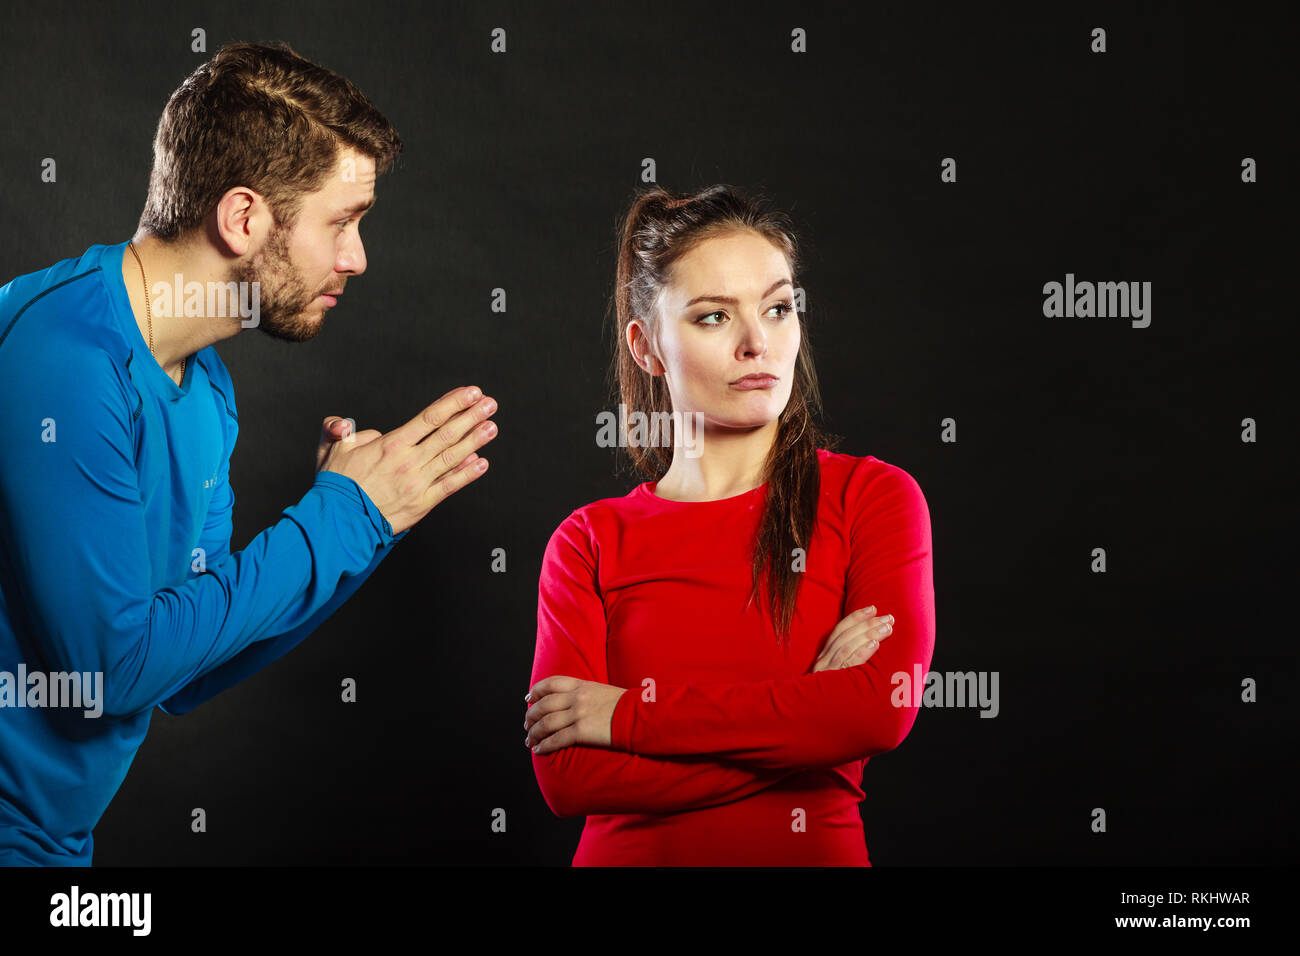 Husband apologizing upset angry wife. Man asking woman for forgivness. Boyfriend trying to convince girlfriend. Conflicted couple in studio on black.  Stock Photo